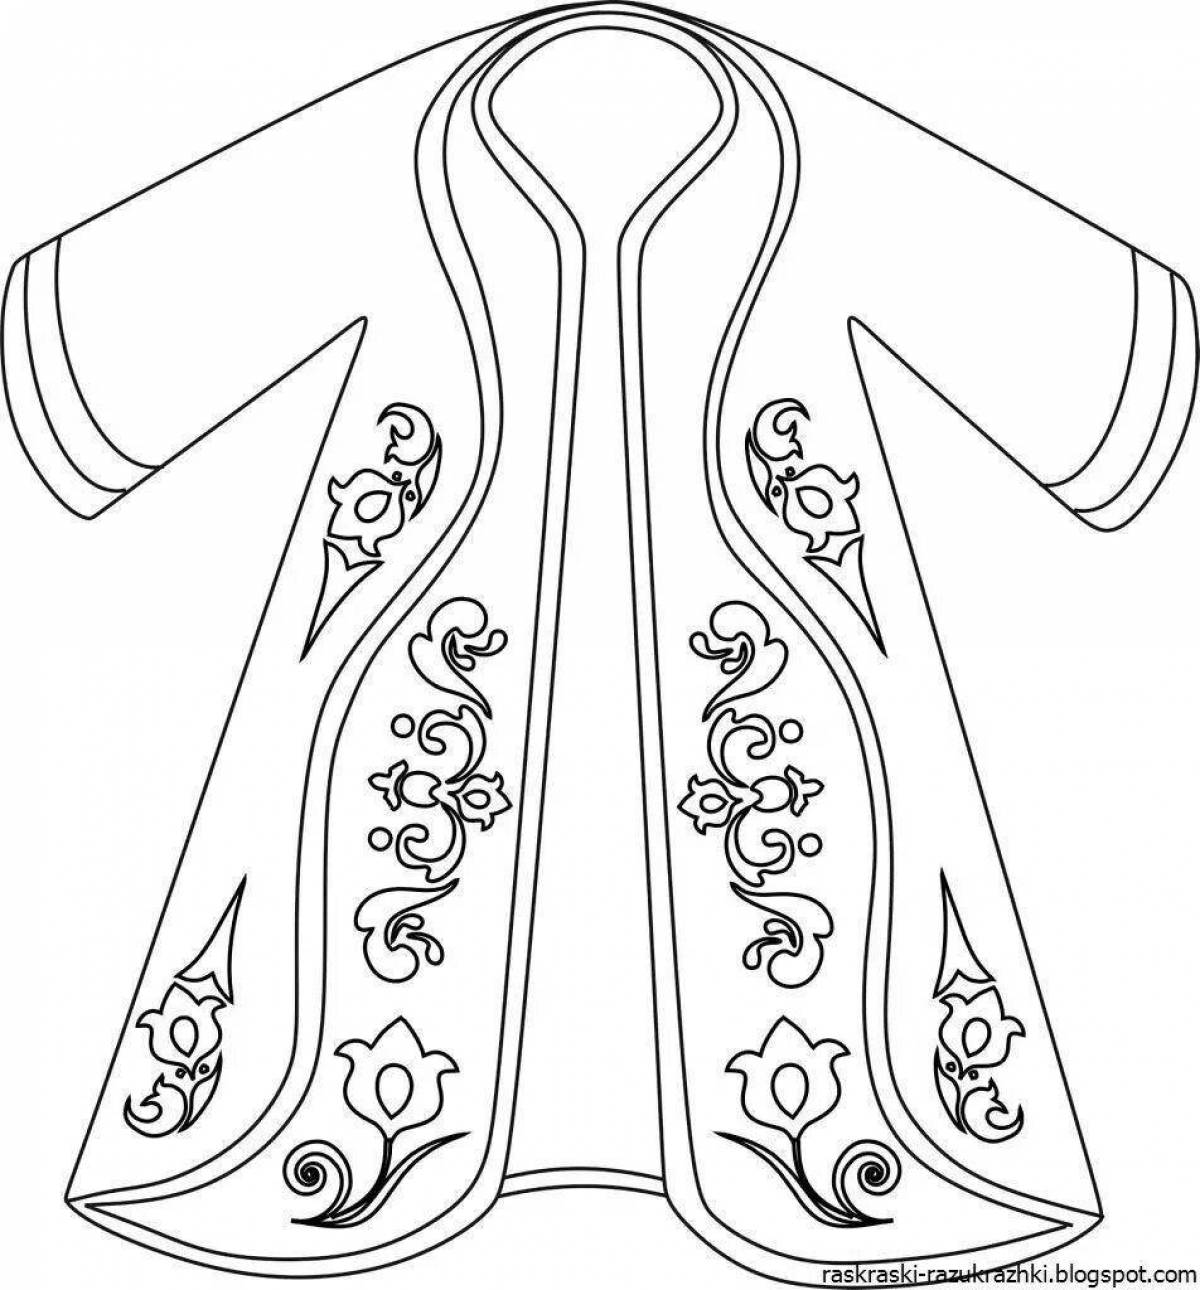 Coloring page delightful Kazakh national costume